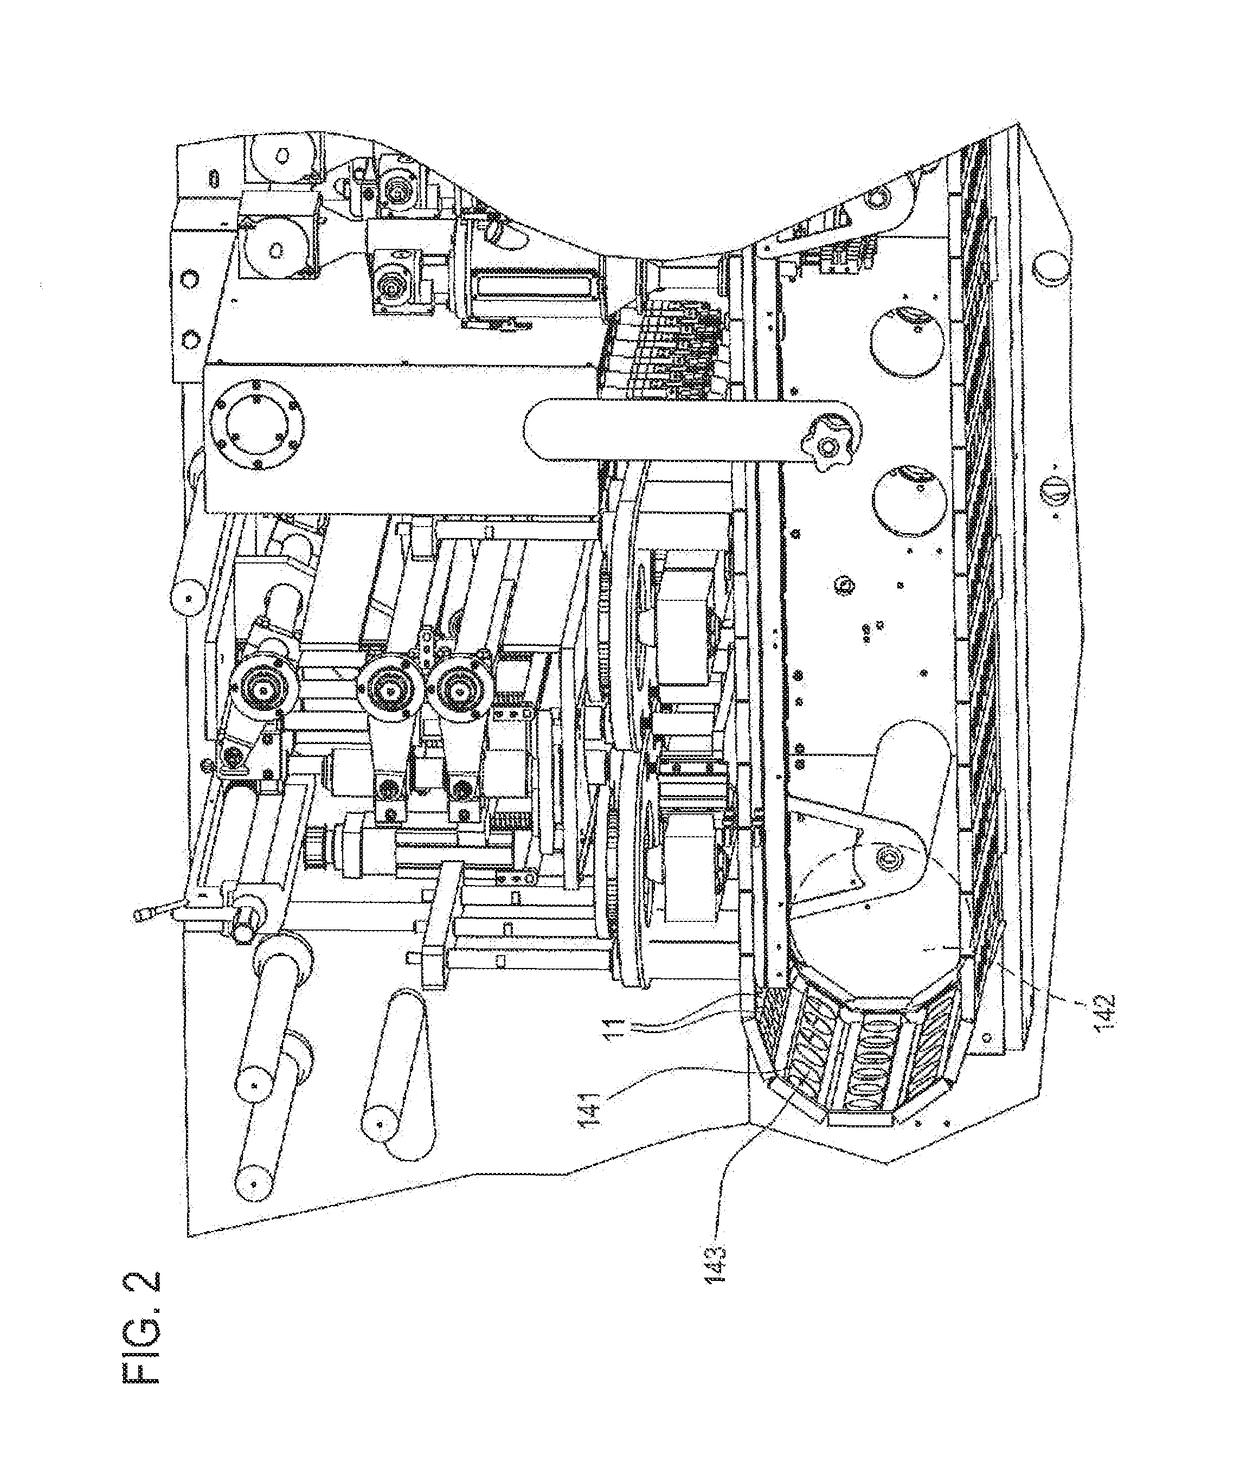 Apparatus and method for packing a product in a container comprising an external body and an internal bag